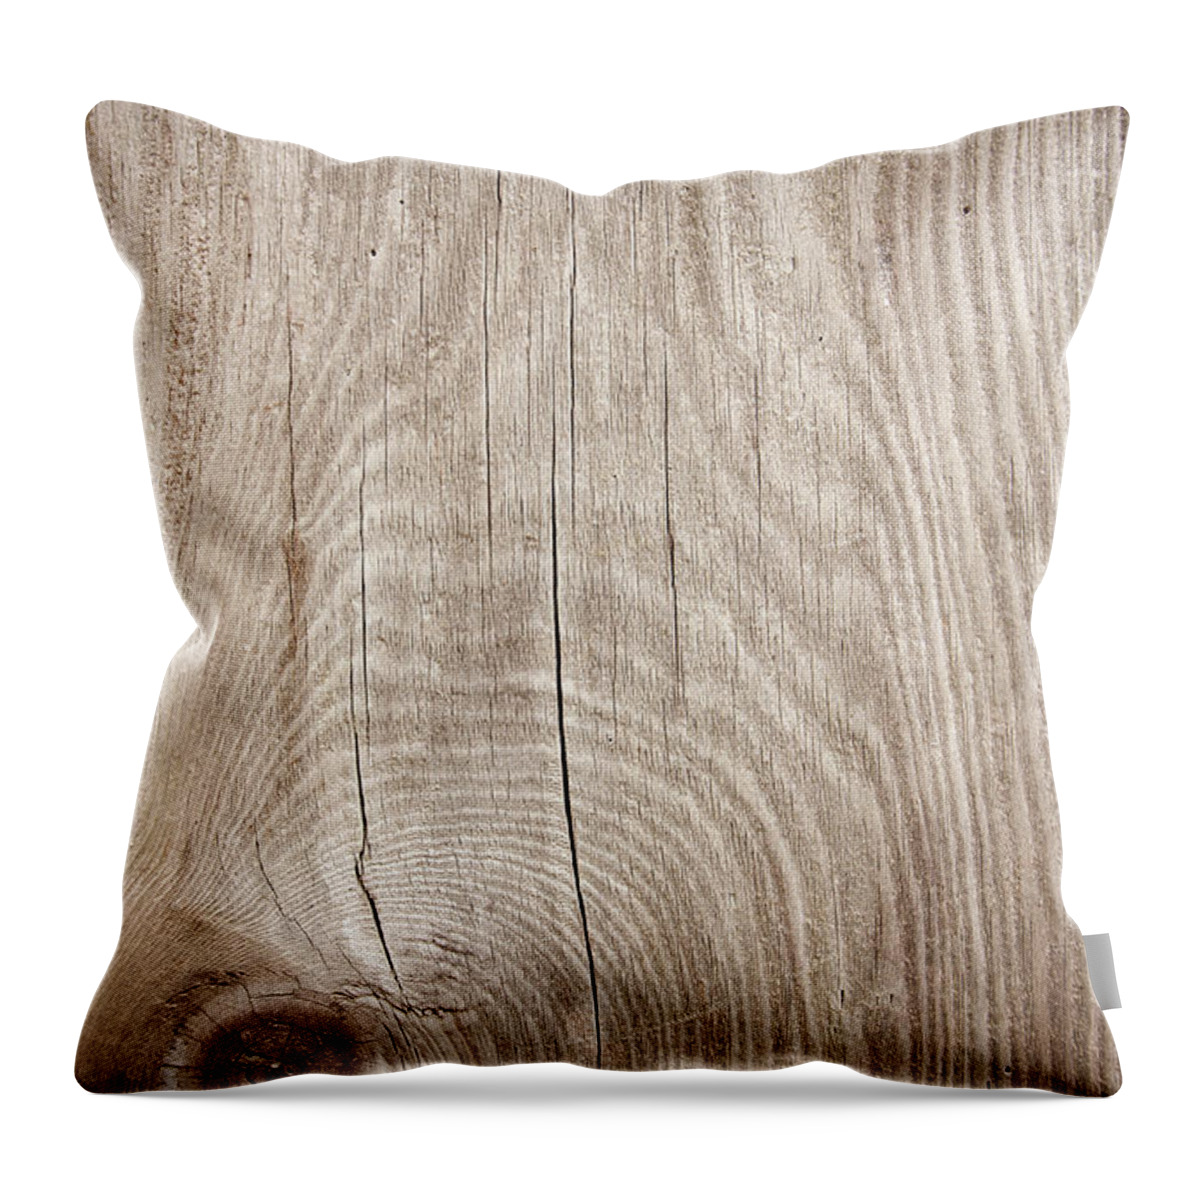 Material Throw Pillow featuring the photograph Grunge Wood Textured Background With by Hudiemm